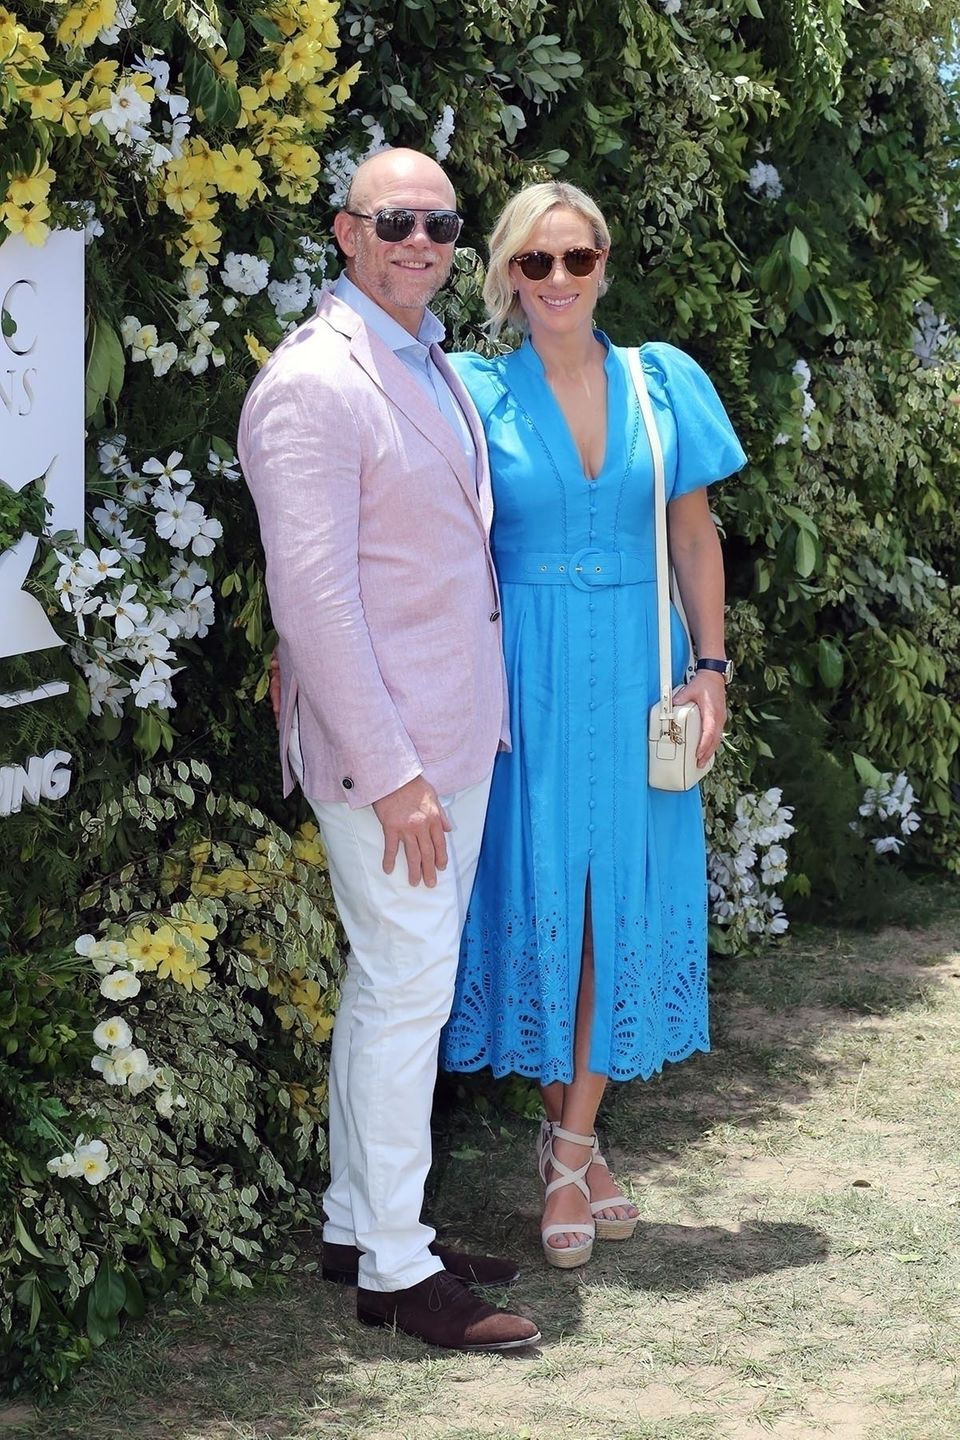 glasses on!  Mike and Zara Tindall protect themselves from the sun's rays in Australia. 